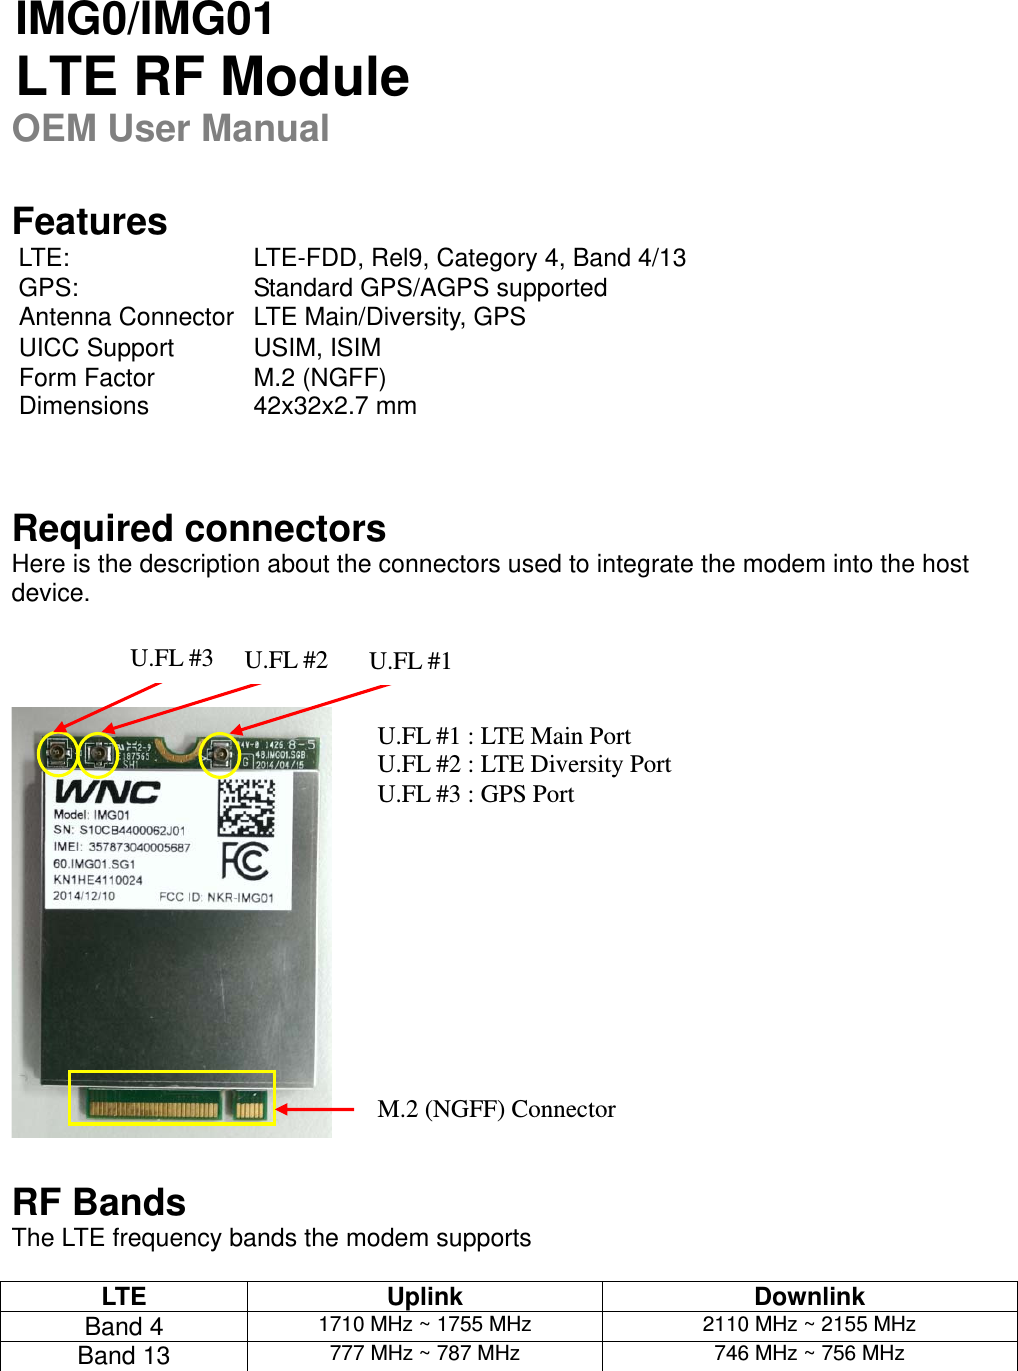   IMG0/IMG01  LTE RF Module OEM User Manual   Features  LTE:  LTE-FDD, Rel9, Category 4, Band 4/13 GPS: Standard GPS/AGPS supported   Antenna Connector  LTE Main/Diversity, GPS   UICC Support  USIM, ISIM Form Factor  M.2 (NGFF) Dimensions 42x32x2.7 mm   Required connectors Here is the description about the connectors used to integrate the modem into the host device.      RF Bands The LTE frequency bands the modem supports  LTE Uplink  Downlink Band 4  1710 MHz ~ 1755 MHz  2110 MHz ~ 2155 MHz Band 13  777 MHz ~ 787 MHz 746 MHz ~ 756 MHz U.FL #1 U.FL #2 U.FL #3 U.FL #1 : LTE Main Port U.FL #2 : LTE Diversity Port U.FL #3 : GPS Port M.2 (NGFF) Connector   